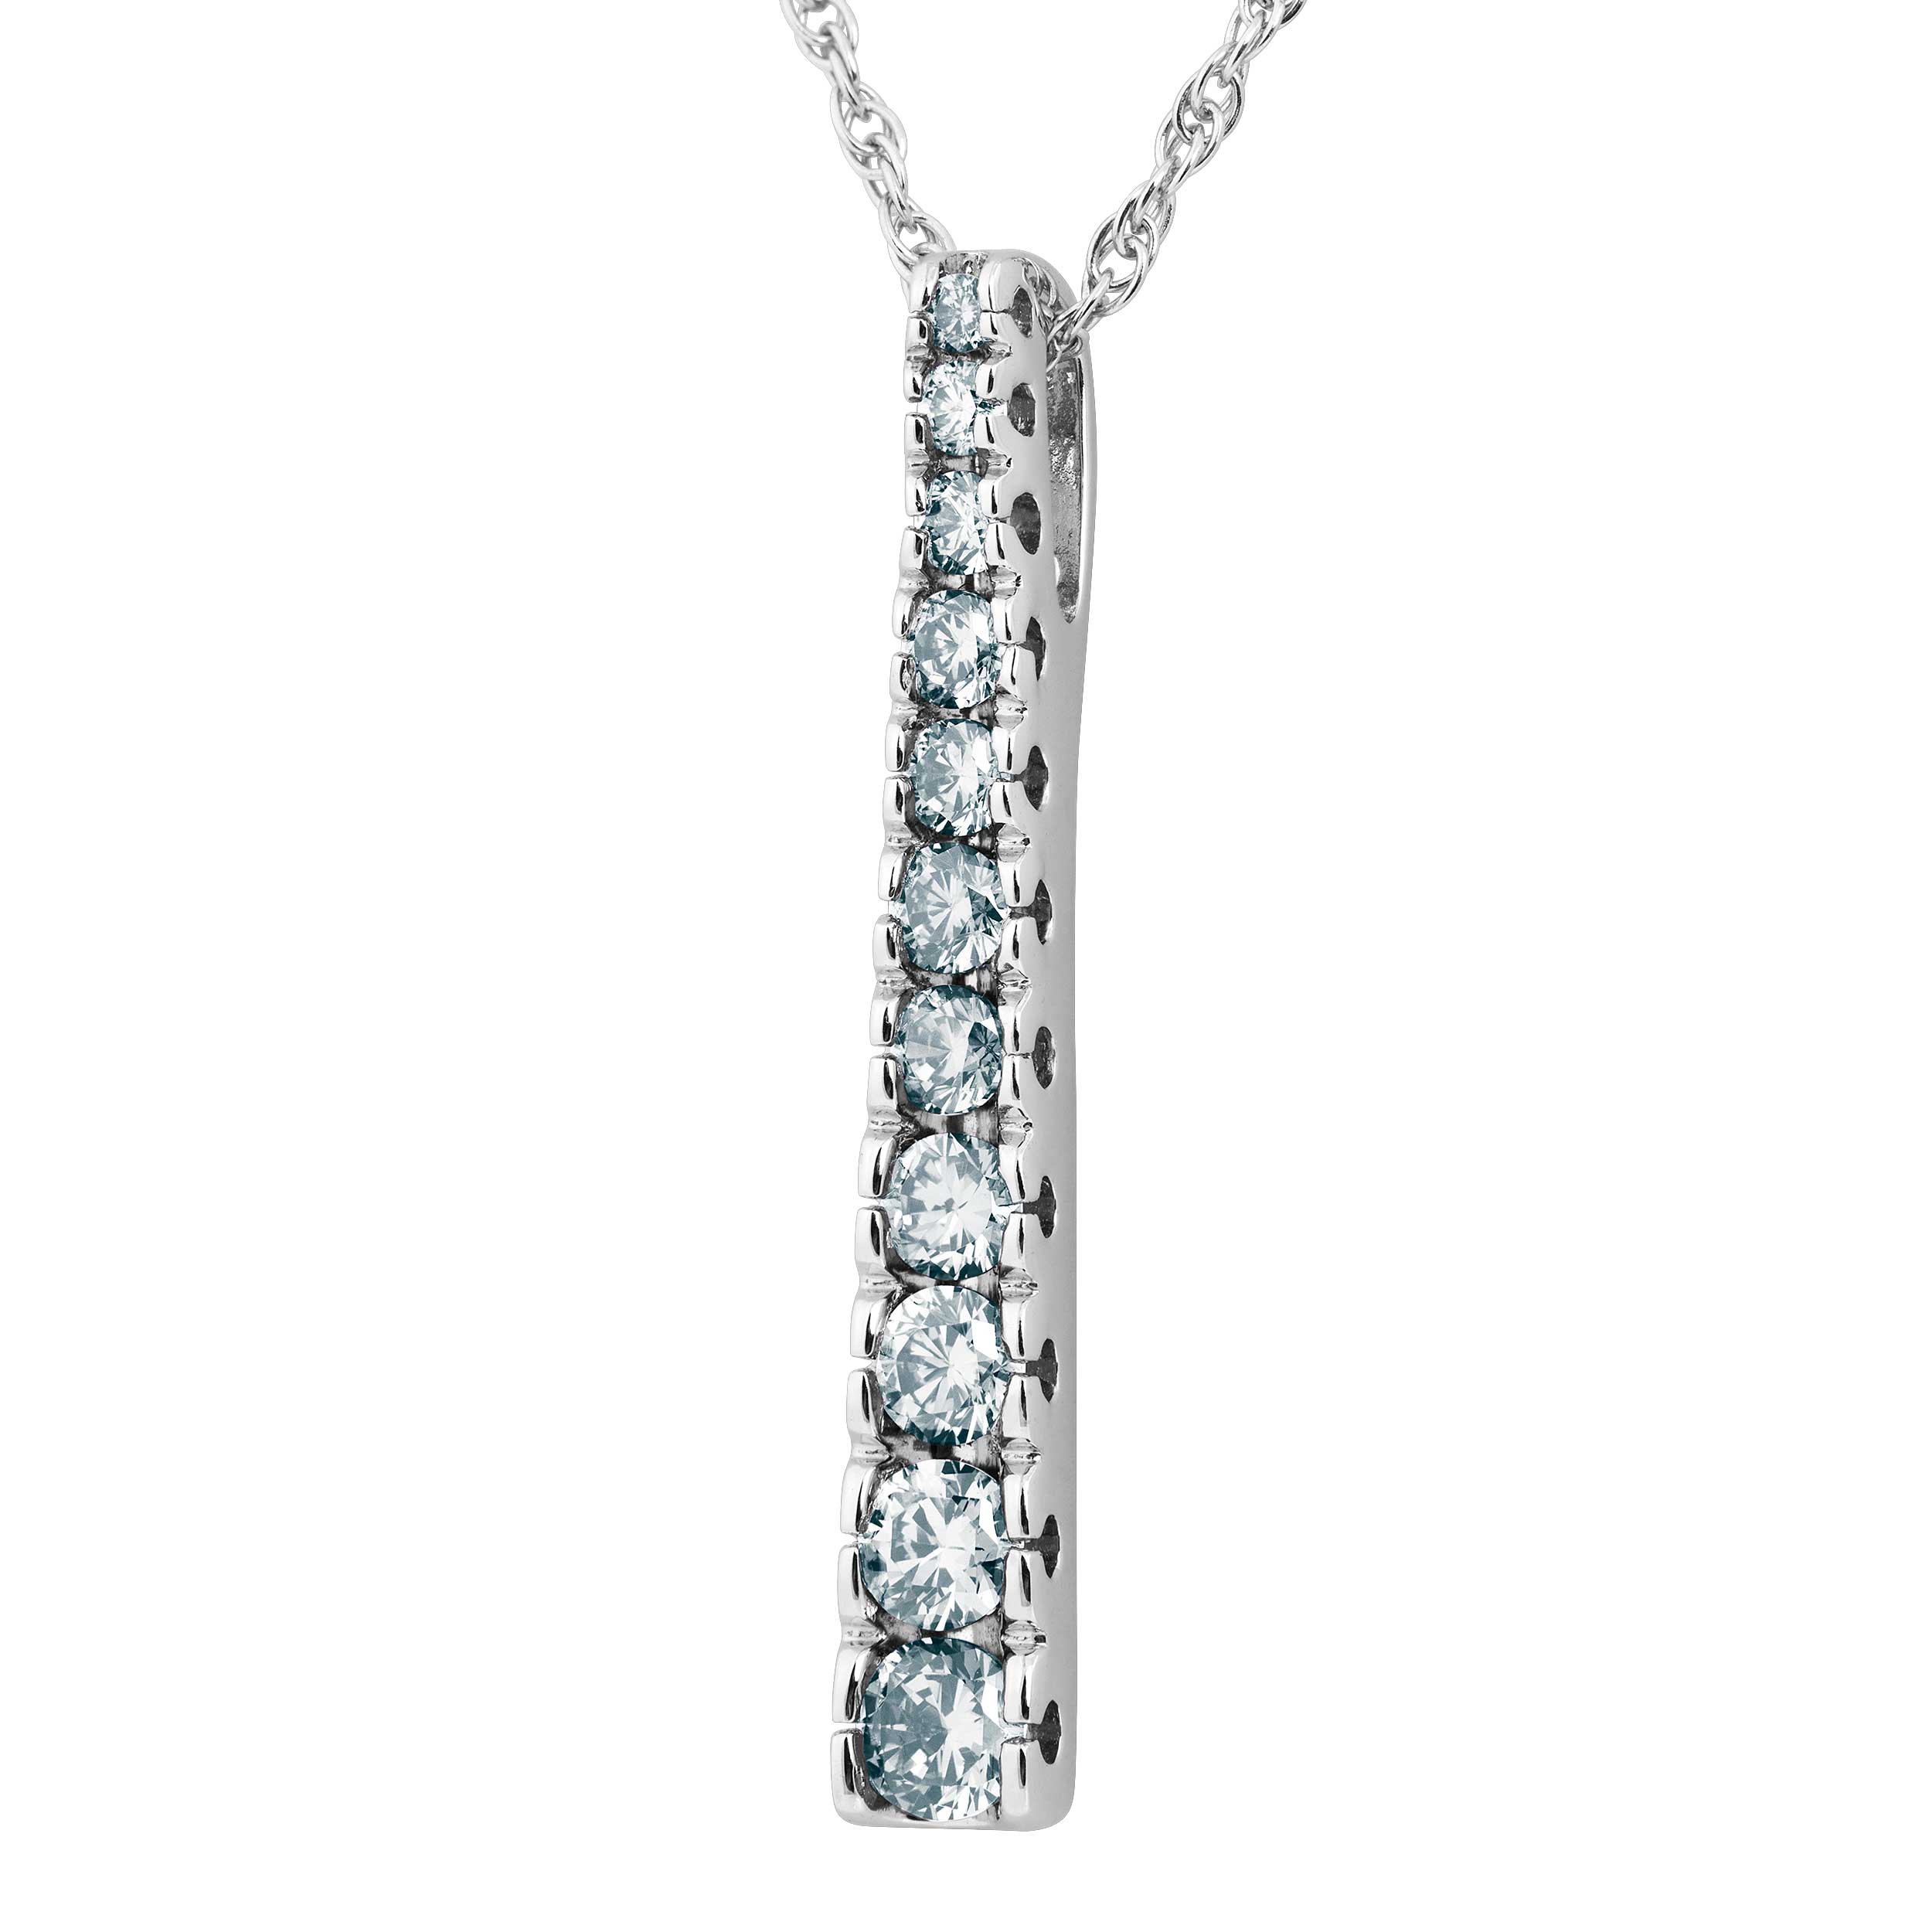 White Topaz Gradual Pendant Necklace, Rhodium Plated Sterling Silver